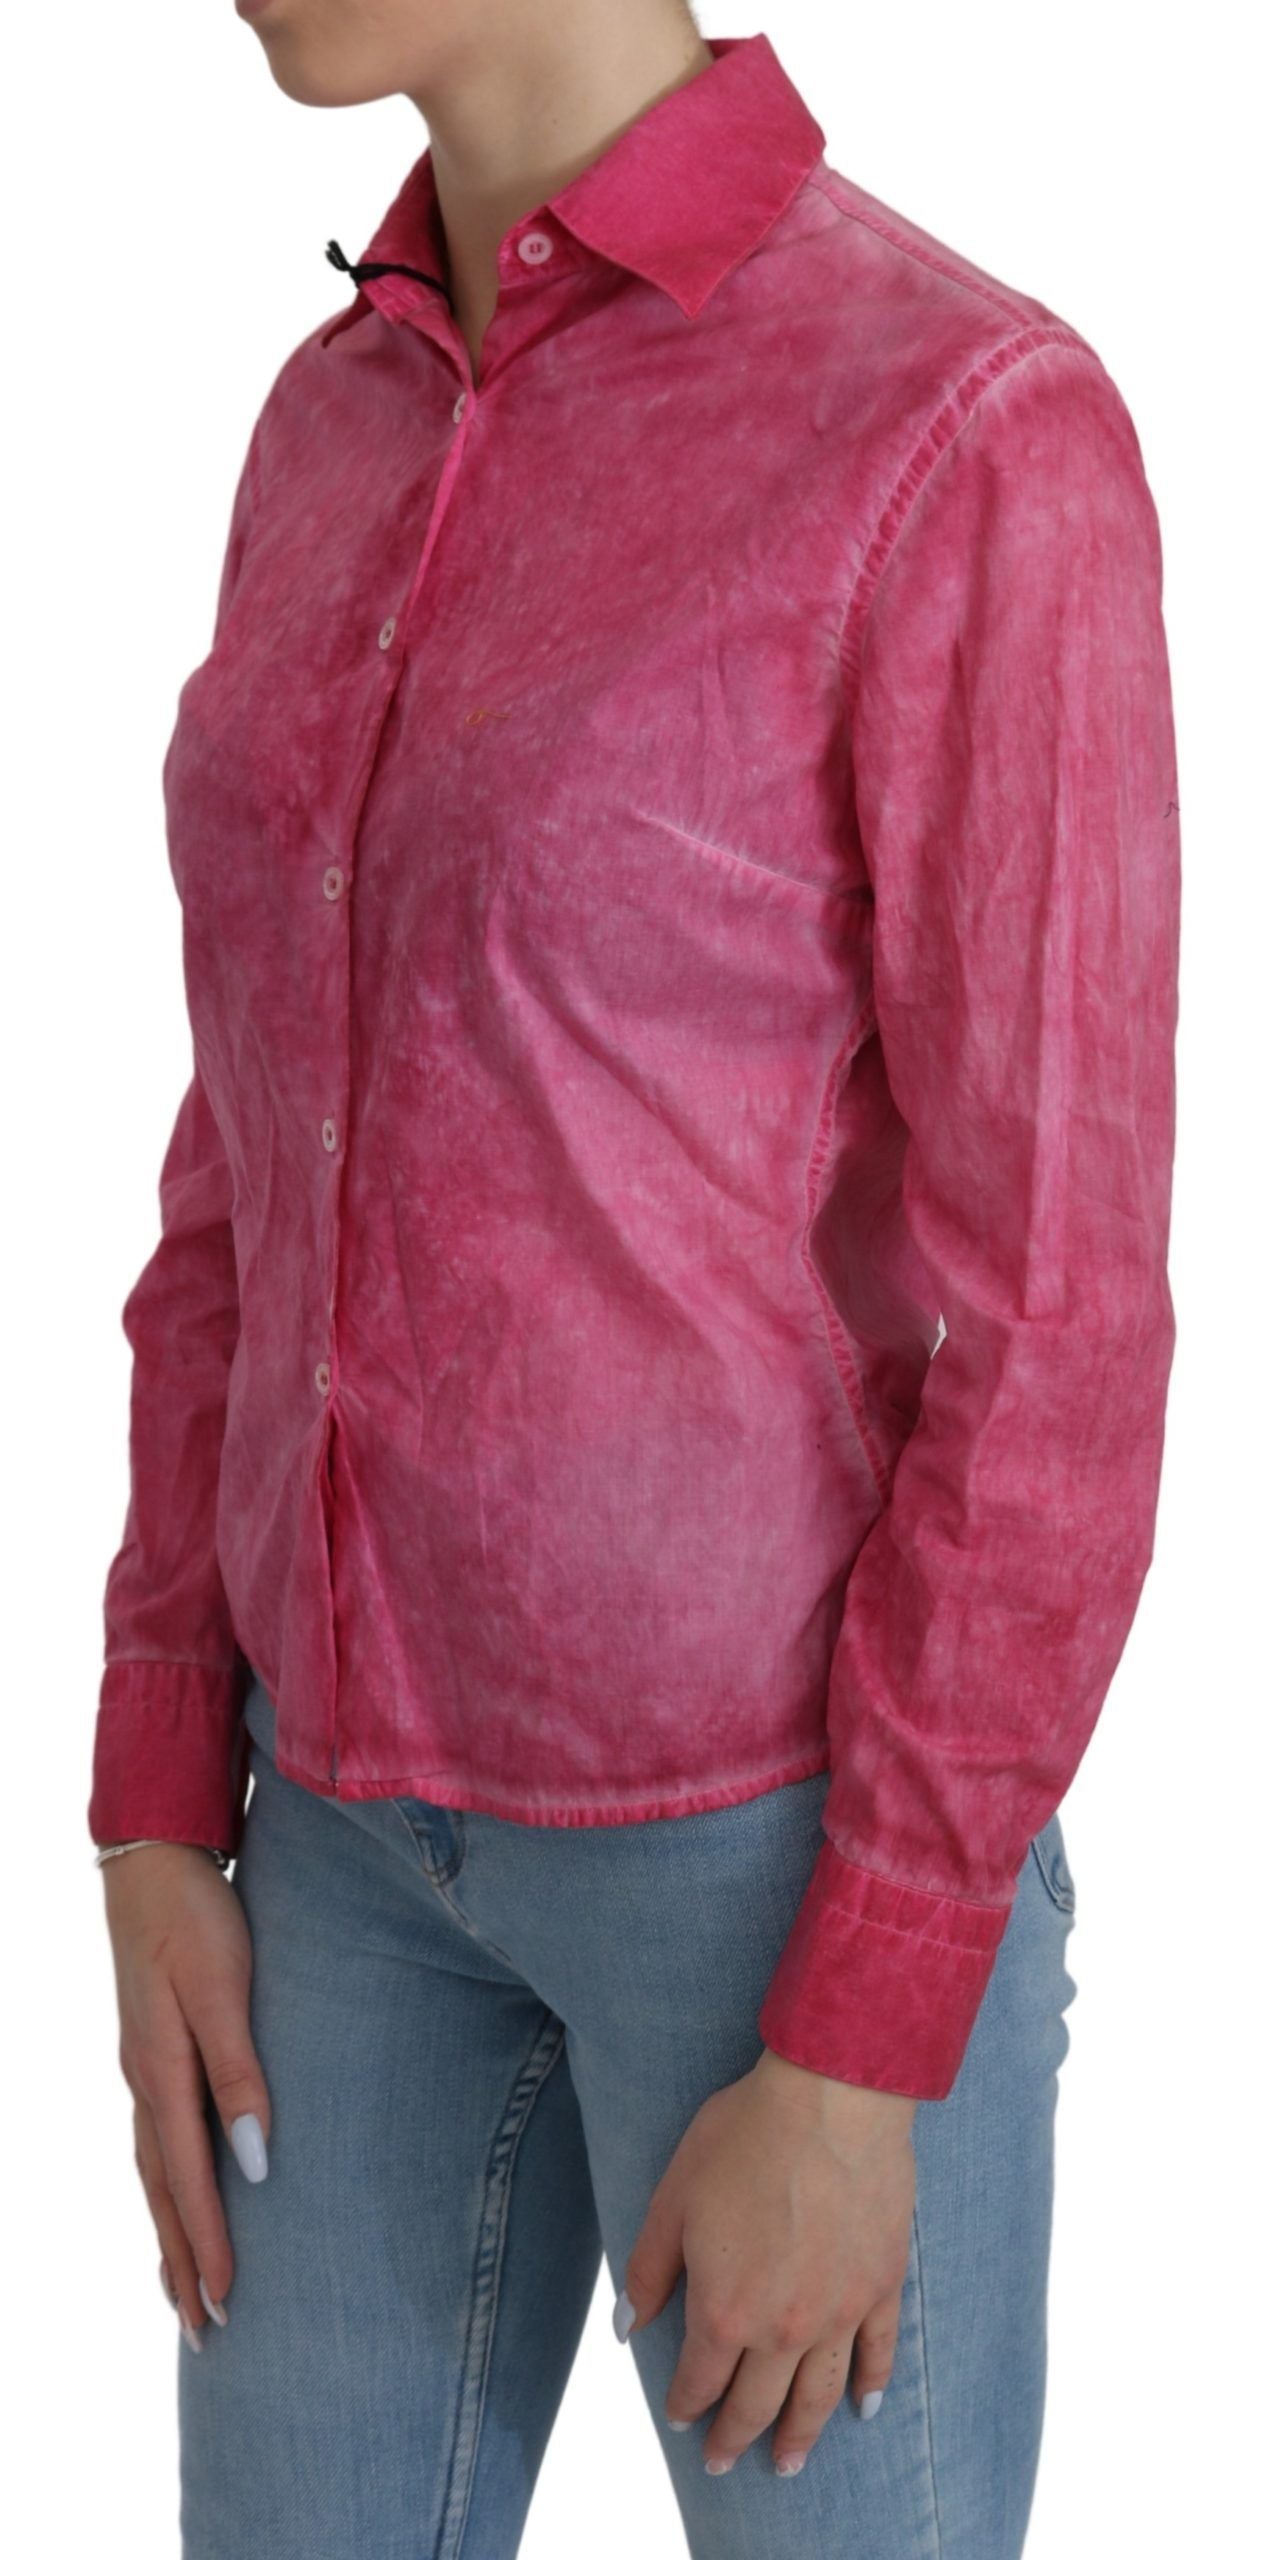 Ermanno Scervino Pink Collared Long Sleeve Shirt Blouse Top